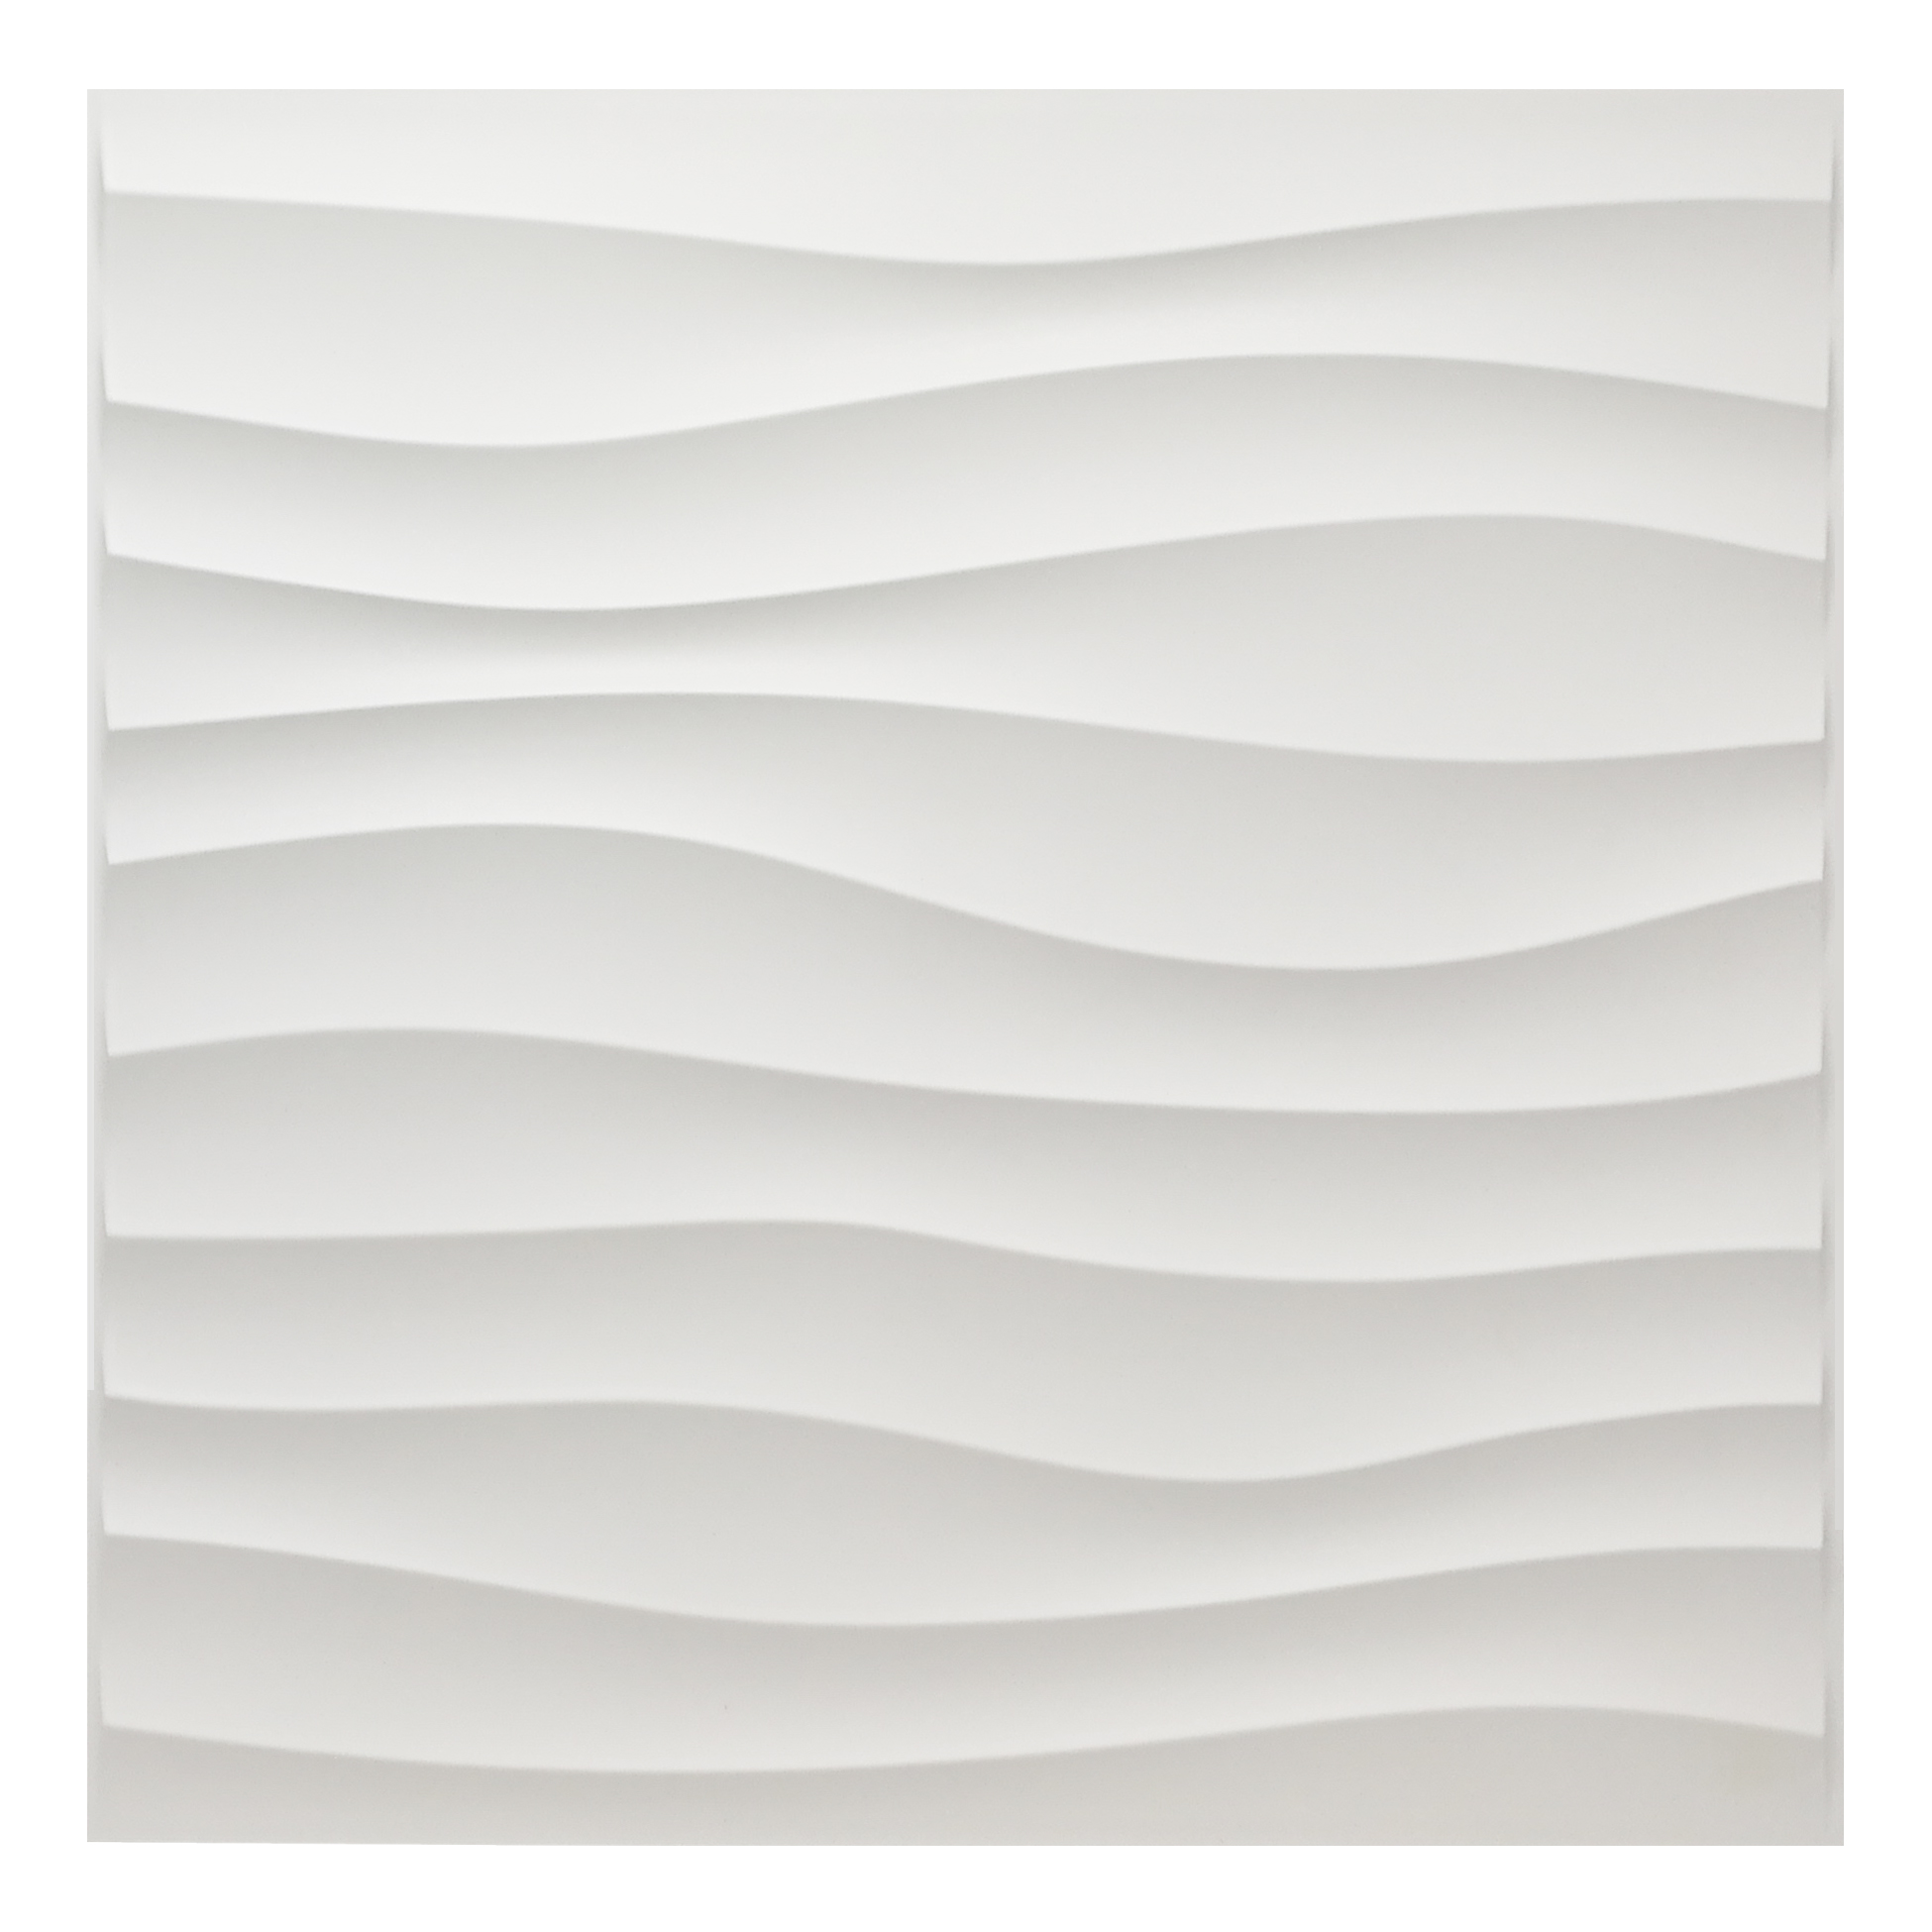 A10040 - Plastic 3D Wall Panel PVC Wave Wall Design,Paintable Wall Panel,White, 12 Tiles 32 SF